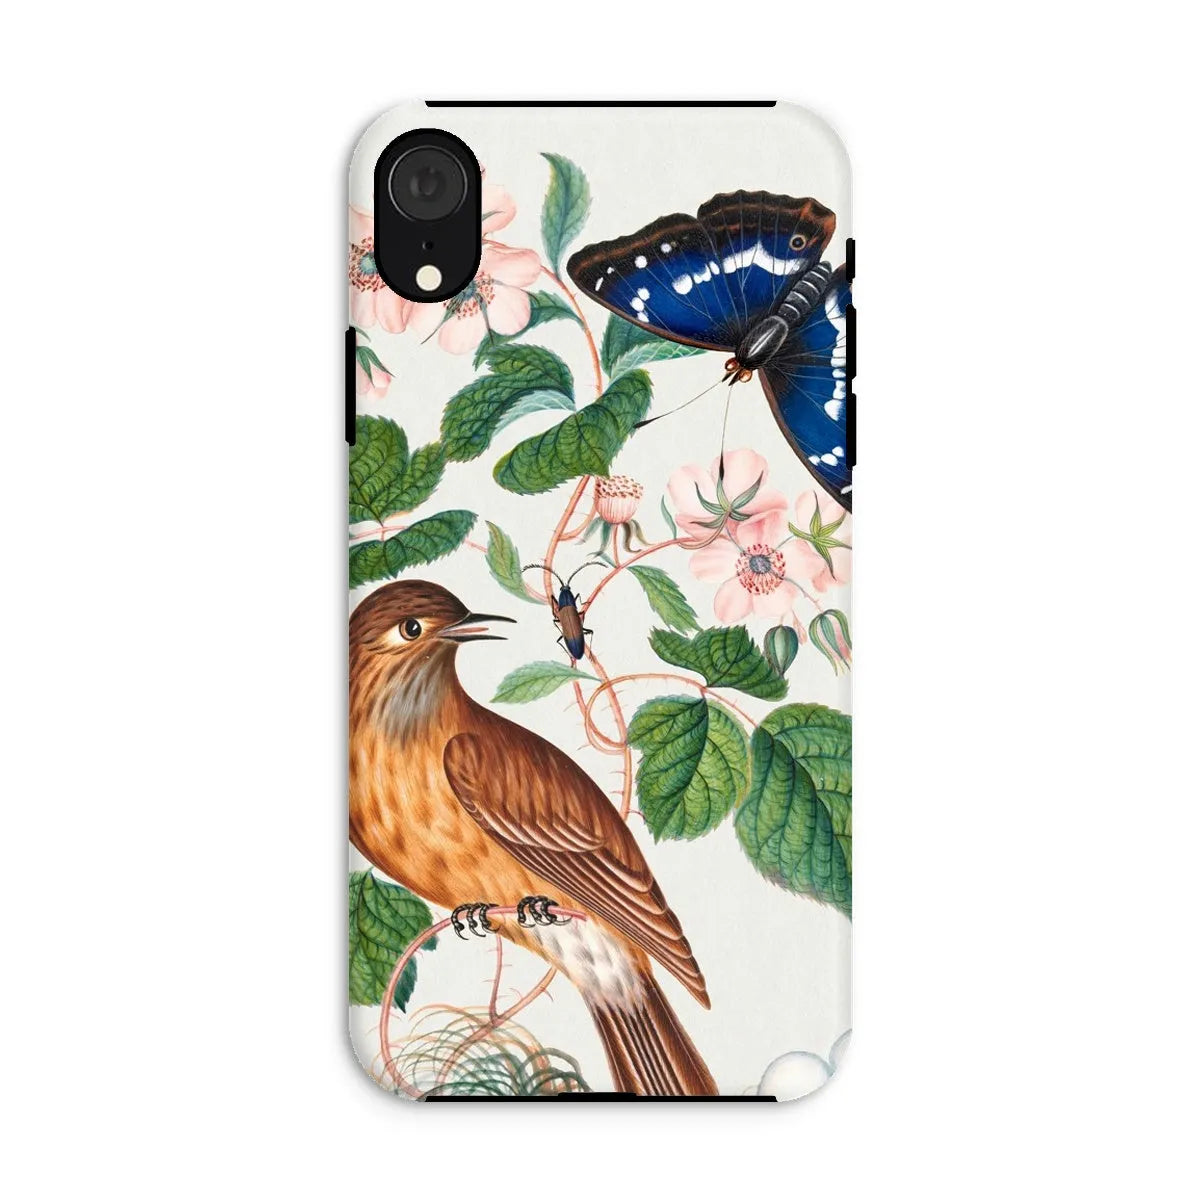 Flycatcher Emperor And Beetle - Art Phone Case - James Bolton - Iphone Xr / Matte - Mobile Phone Cases - Aesthetic Art